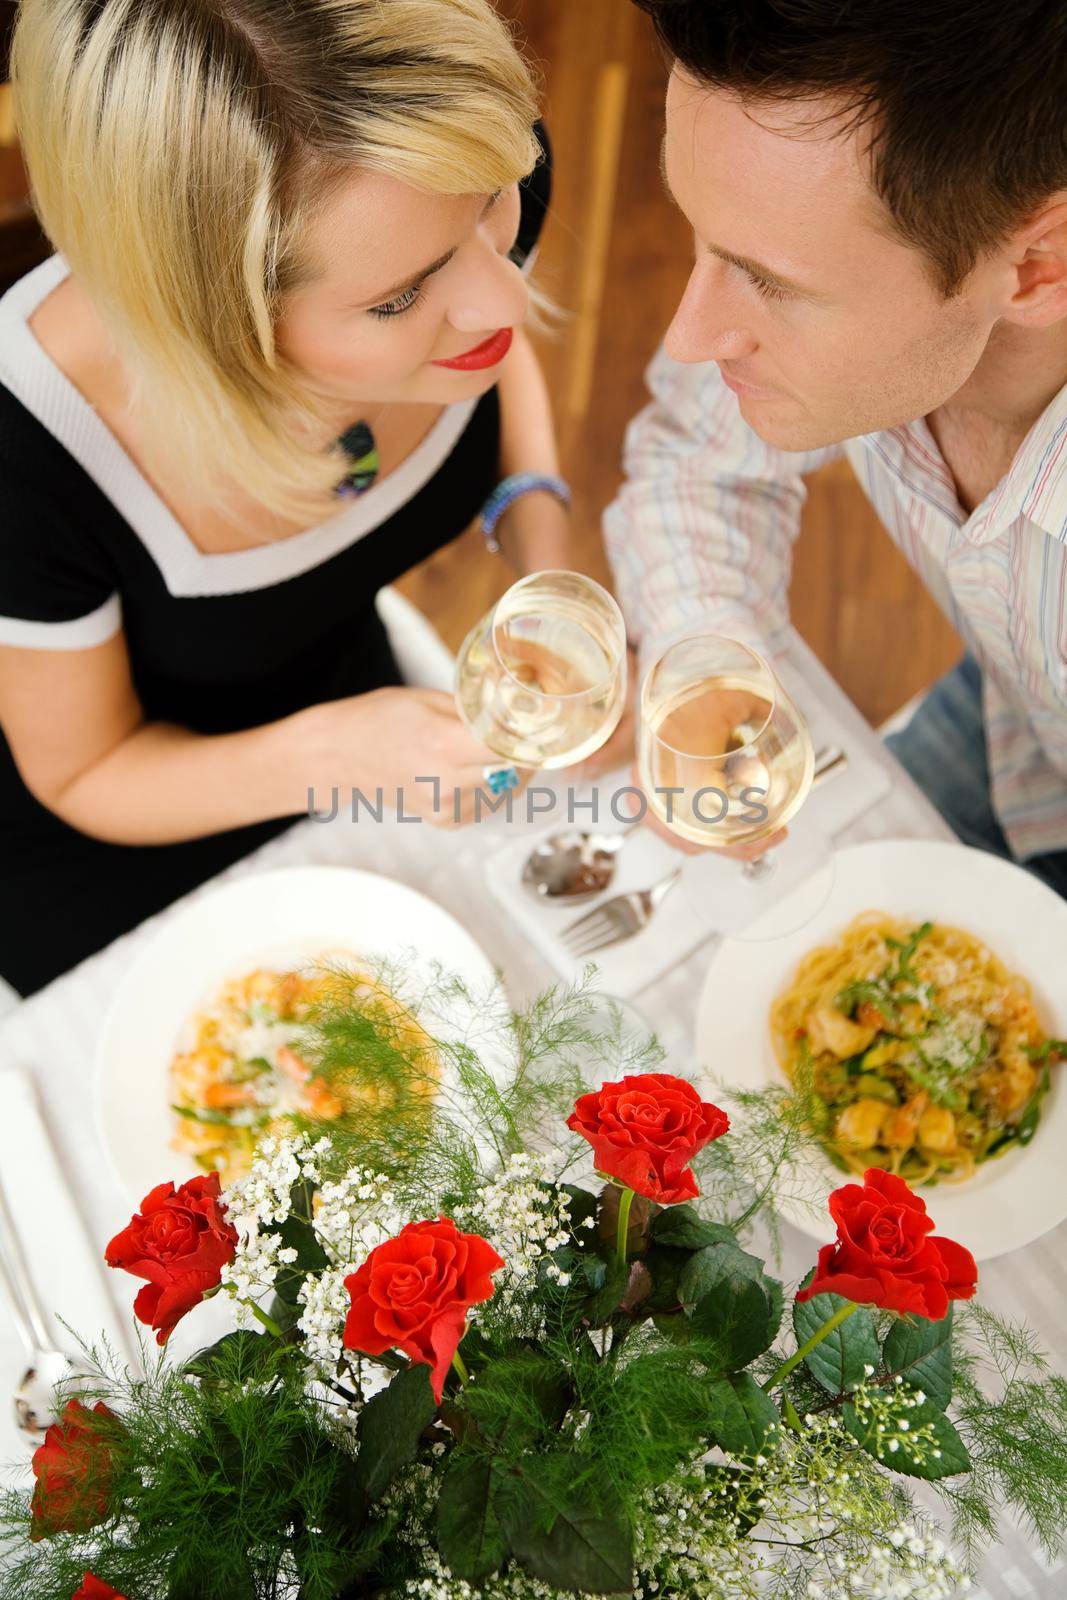 Young couple romantic dinner: letting the white wine glasses clink; focus on the eyes of the people